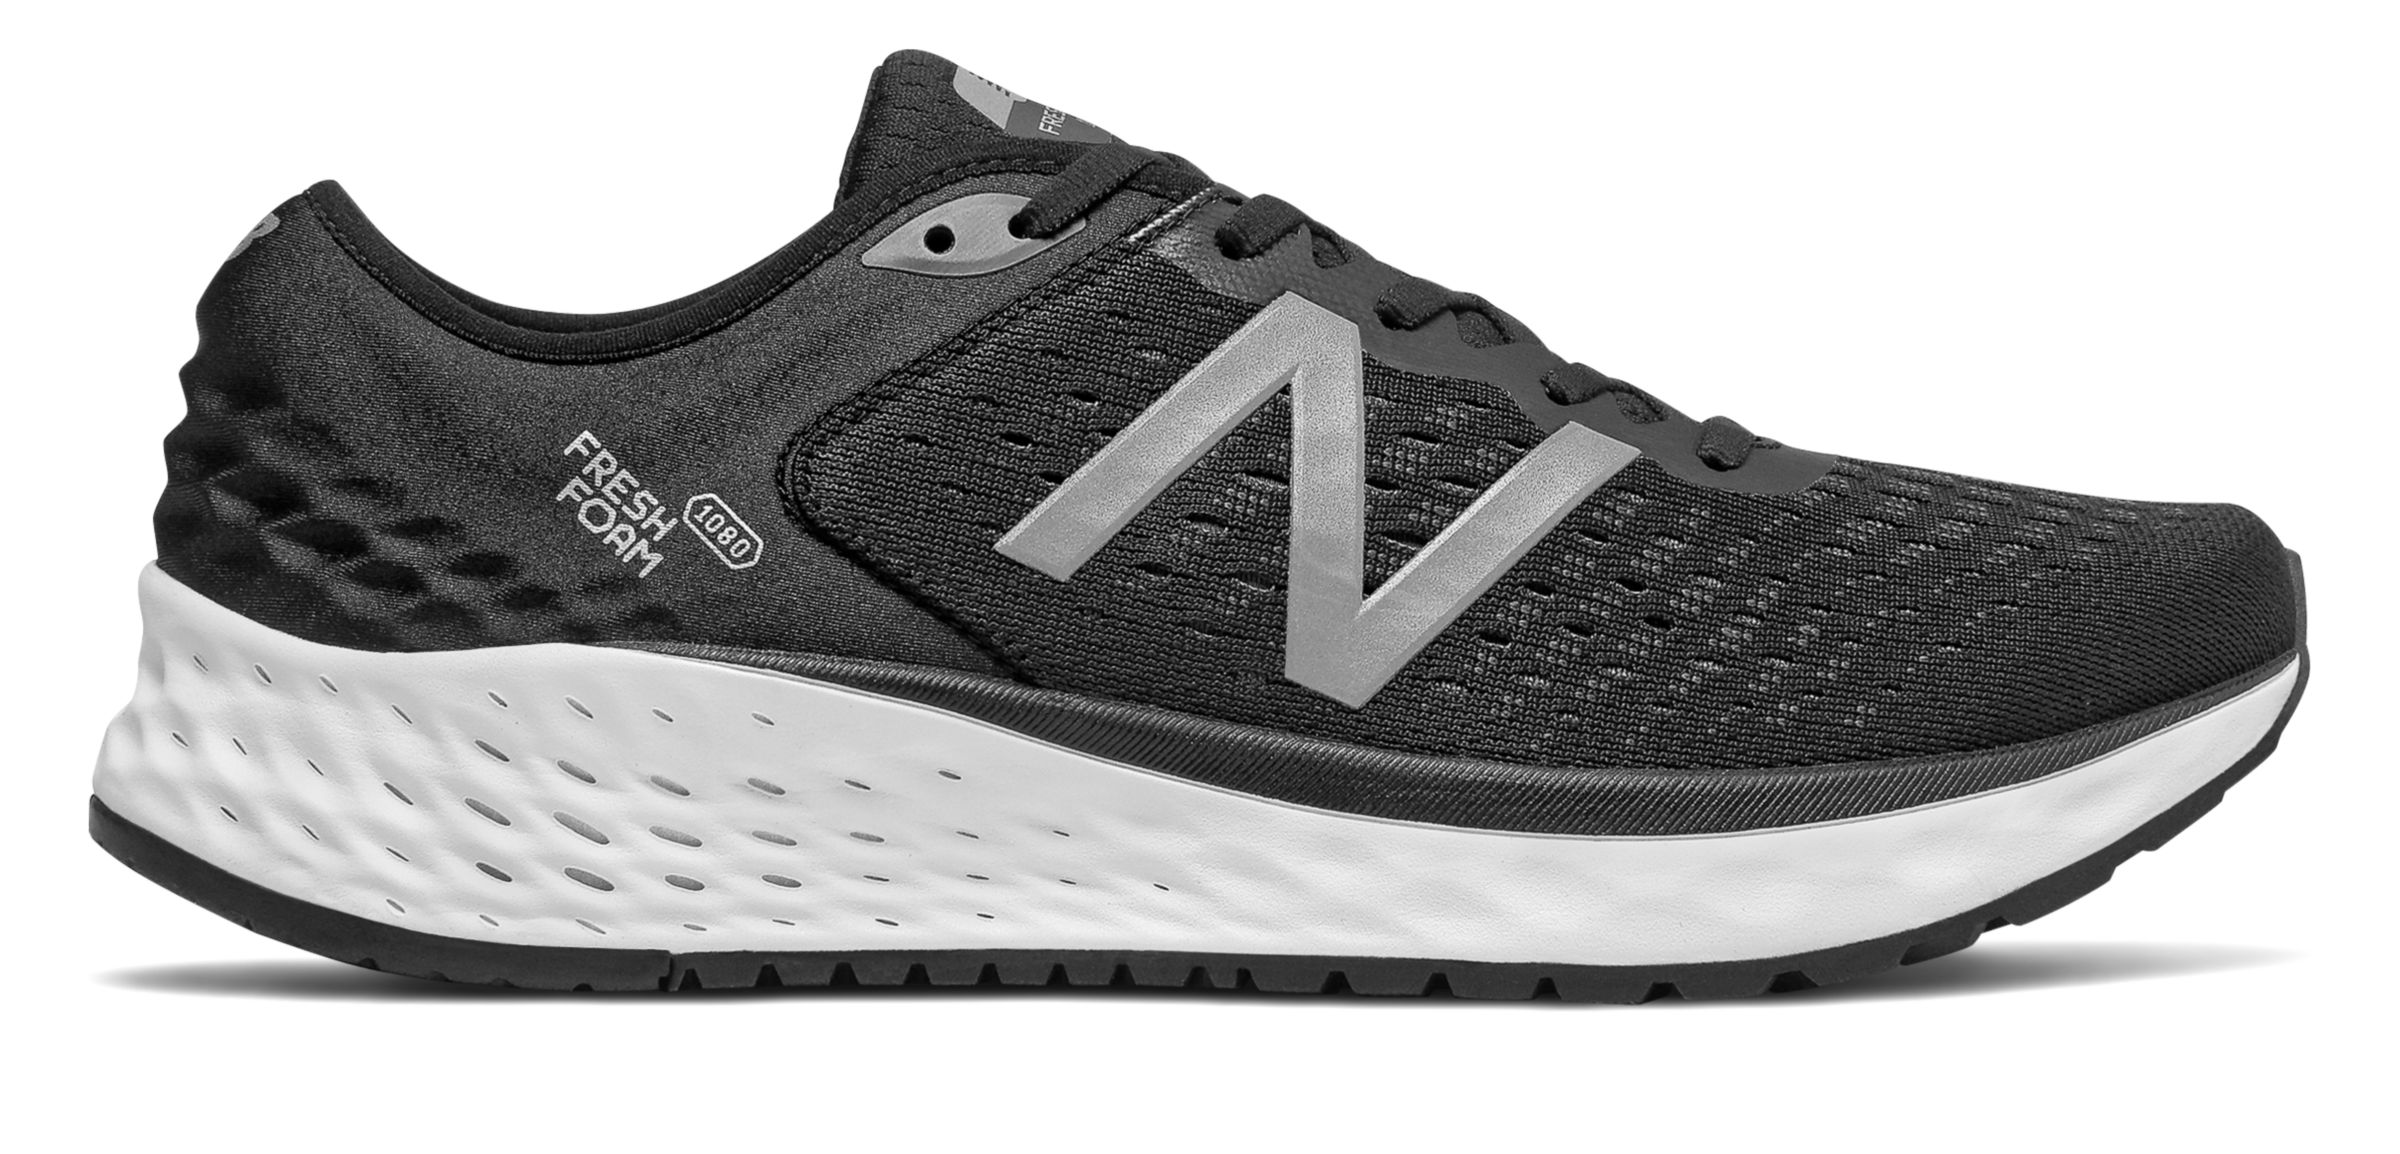 New Balance M1080-V9 on Sale - Discounts Up to 60% Off on M1080BK9 at Joe's New  Balance Outlet